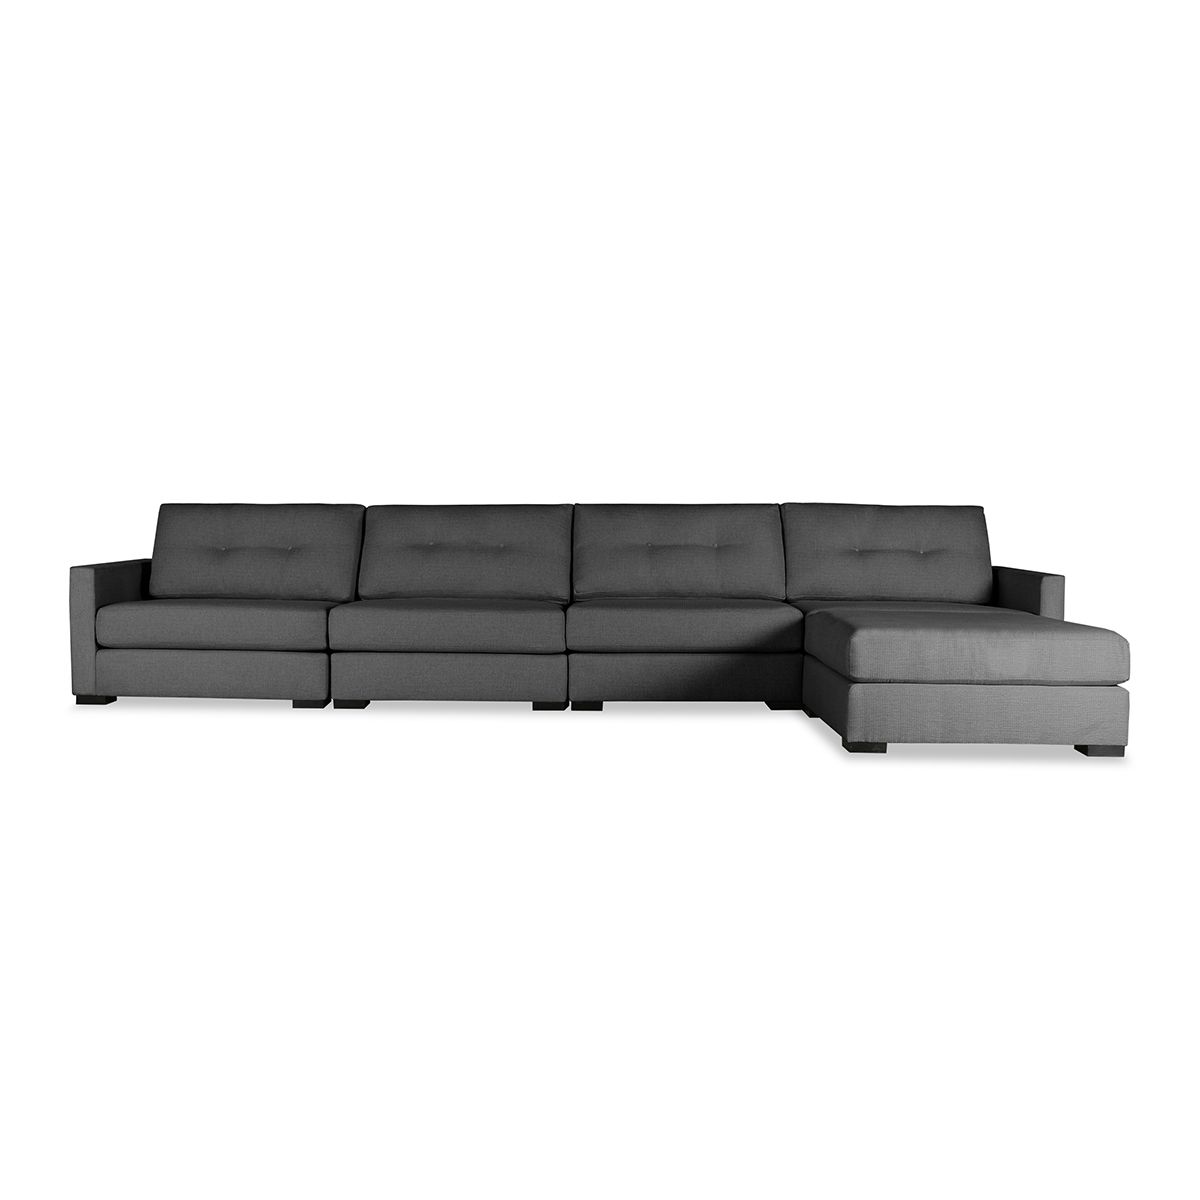 Wilton Buttoned Modular Right Chaise Sectional Pertaining To Wilton Fabric Sectional Sofas (View 6 of 15)